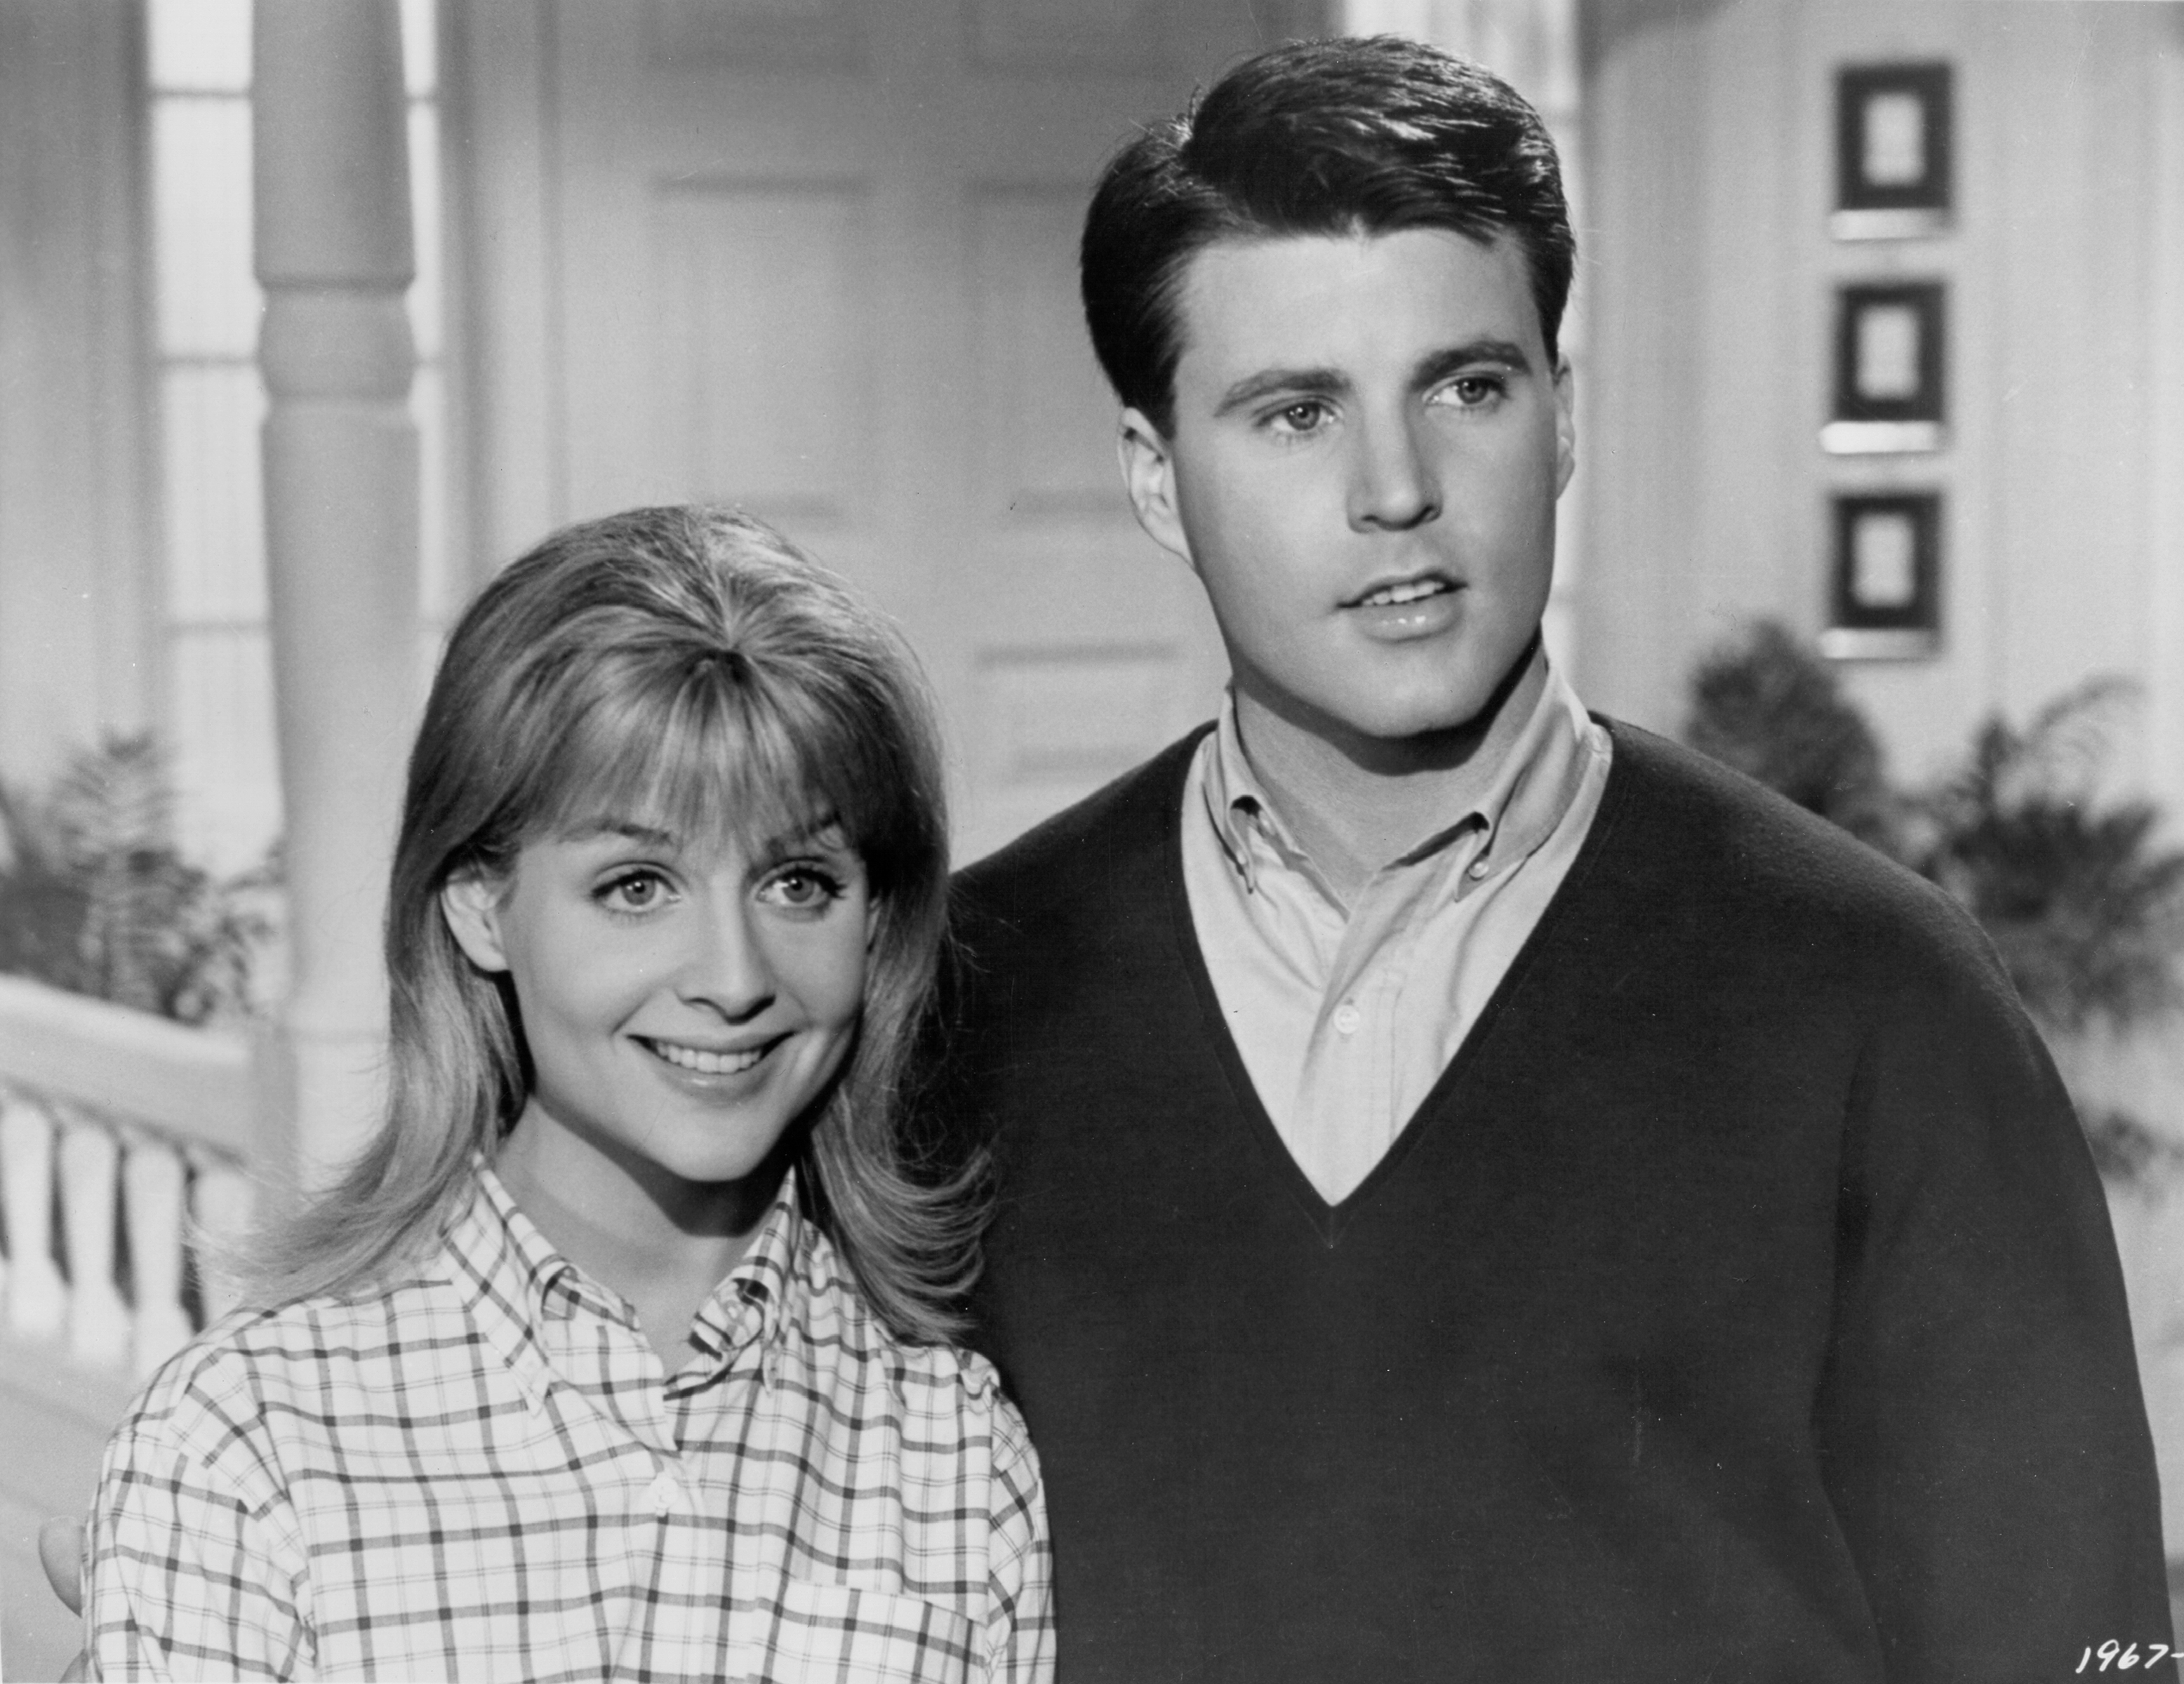 Rick Nelson and Kristin Harmon photographed in 1963 | Source: Getty Images